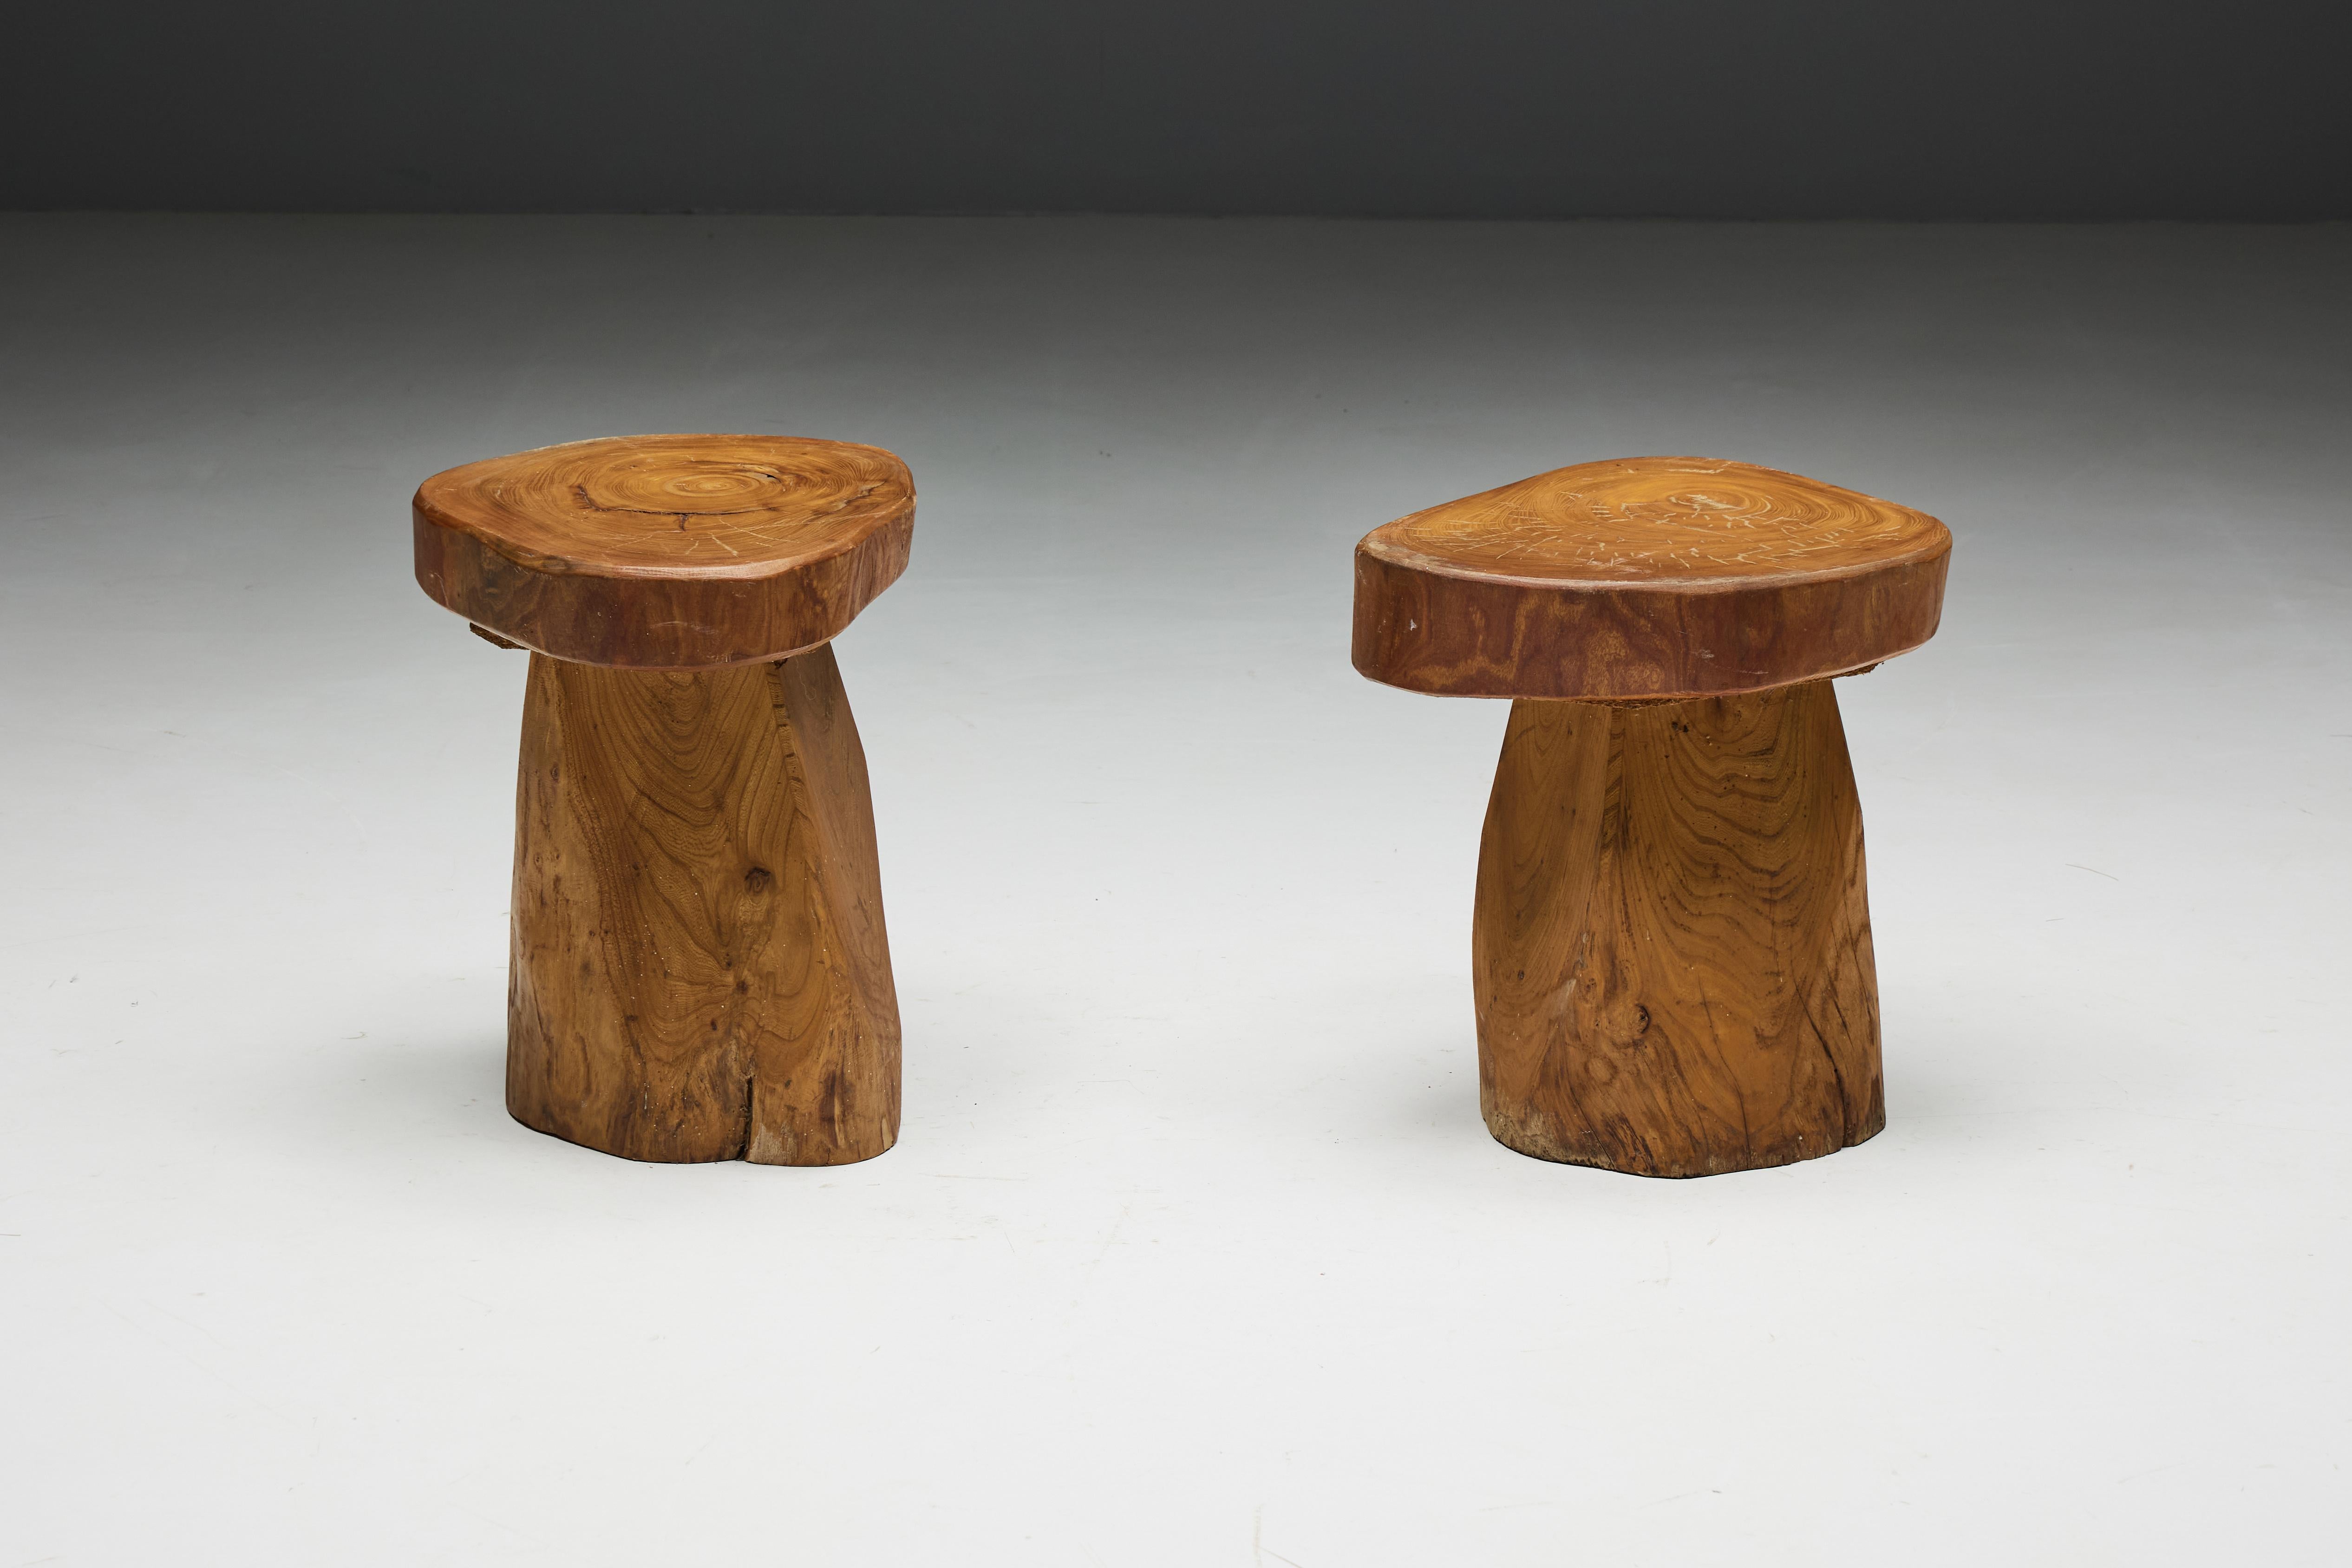 Handcarved monoxylite stools, a testament to 1970s Brazilian craftsmanship and the timeless allure of José Zanine Caldas. The natural beauty of the wood grain takes center stage, an embodiment of Caldas' mastery of form and material. With their